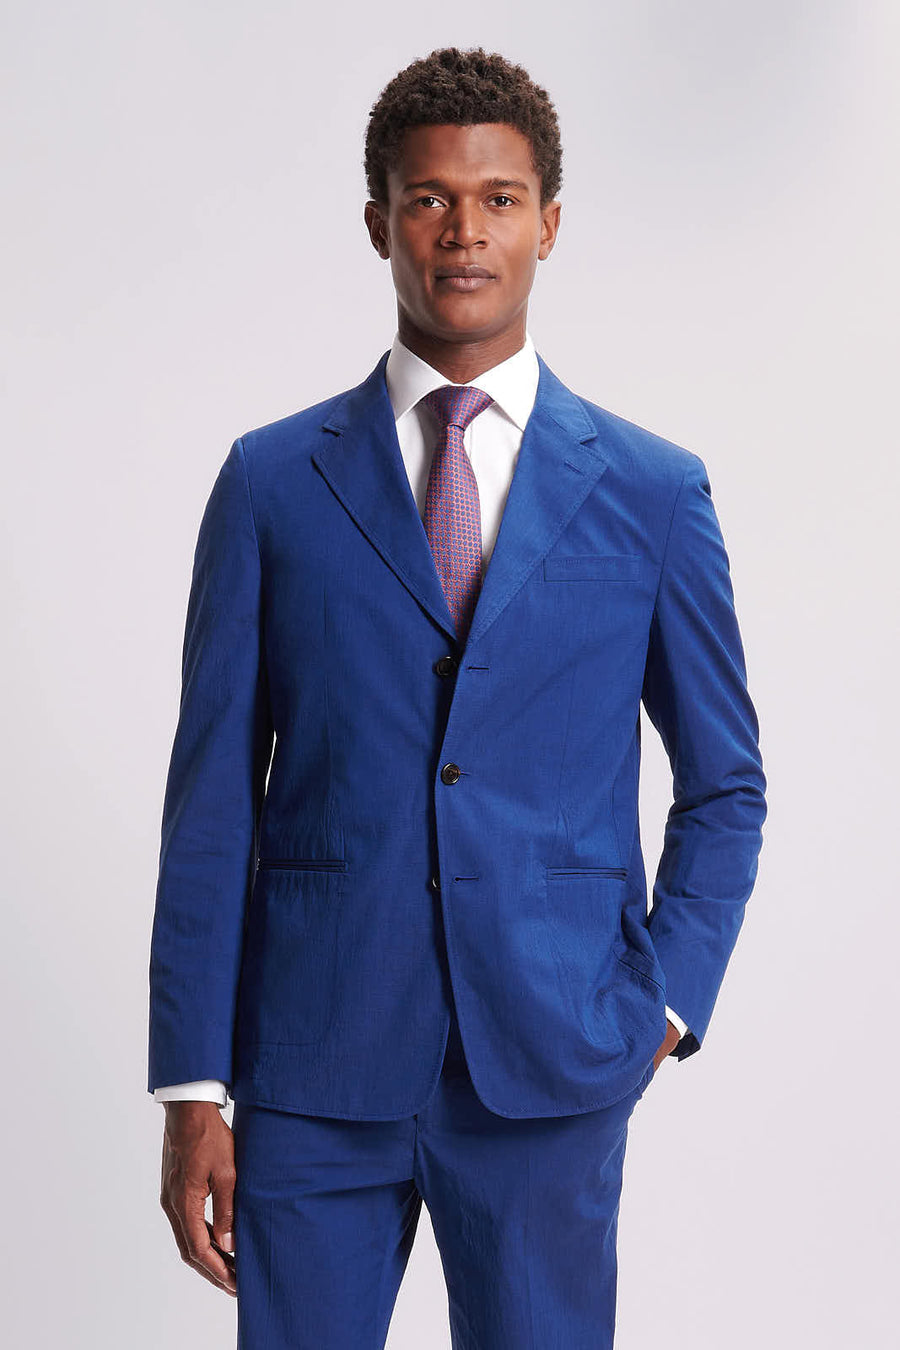 Single Breasted 3 Button Suit Blazer Jacket Blue